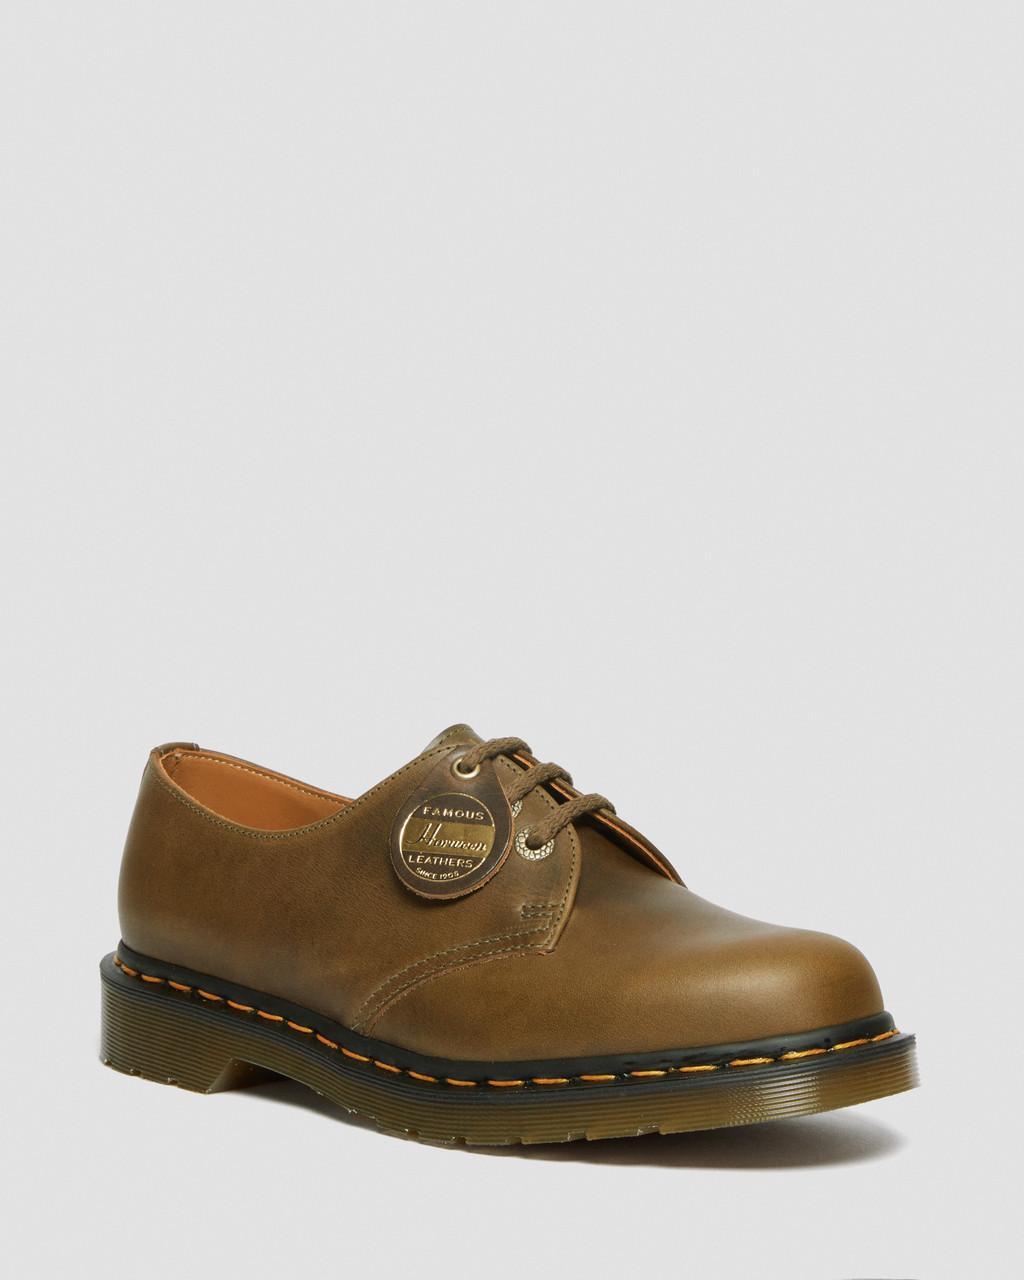 Dr. Martens 1461 Made In England Denver Leather Oxford Shoes in Brown | Lyst